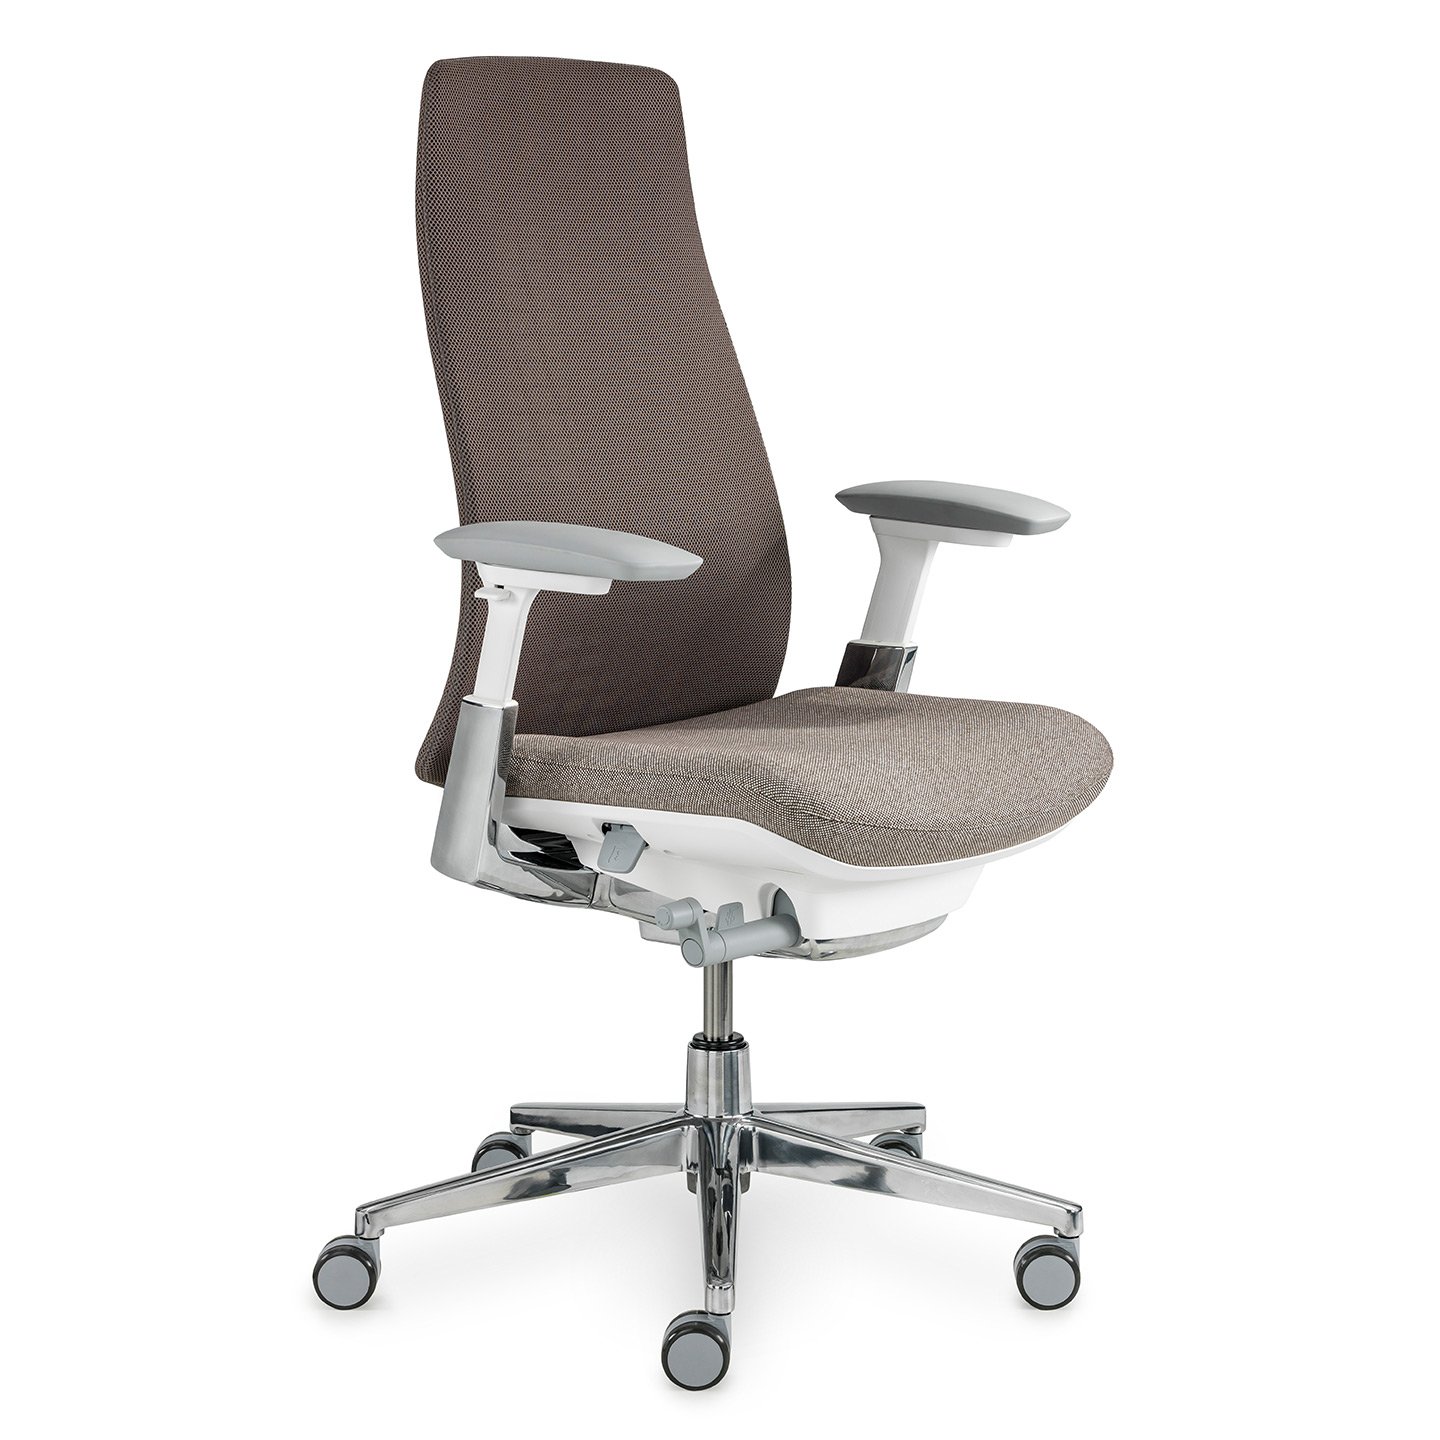 Haworth Fern Task chair in brown seen at an angle